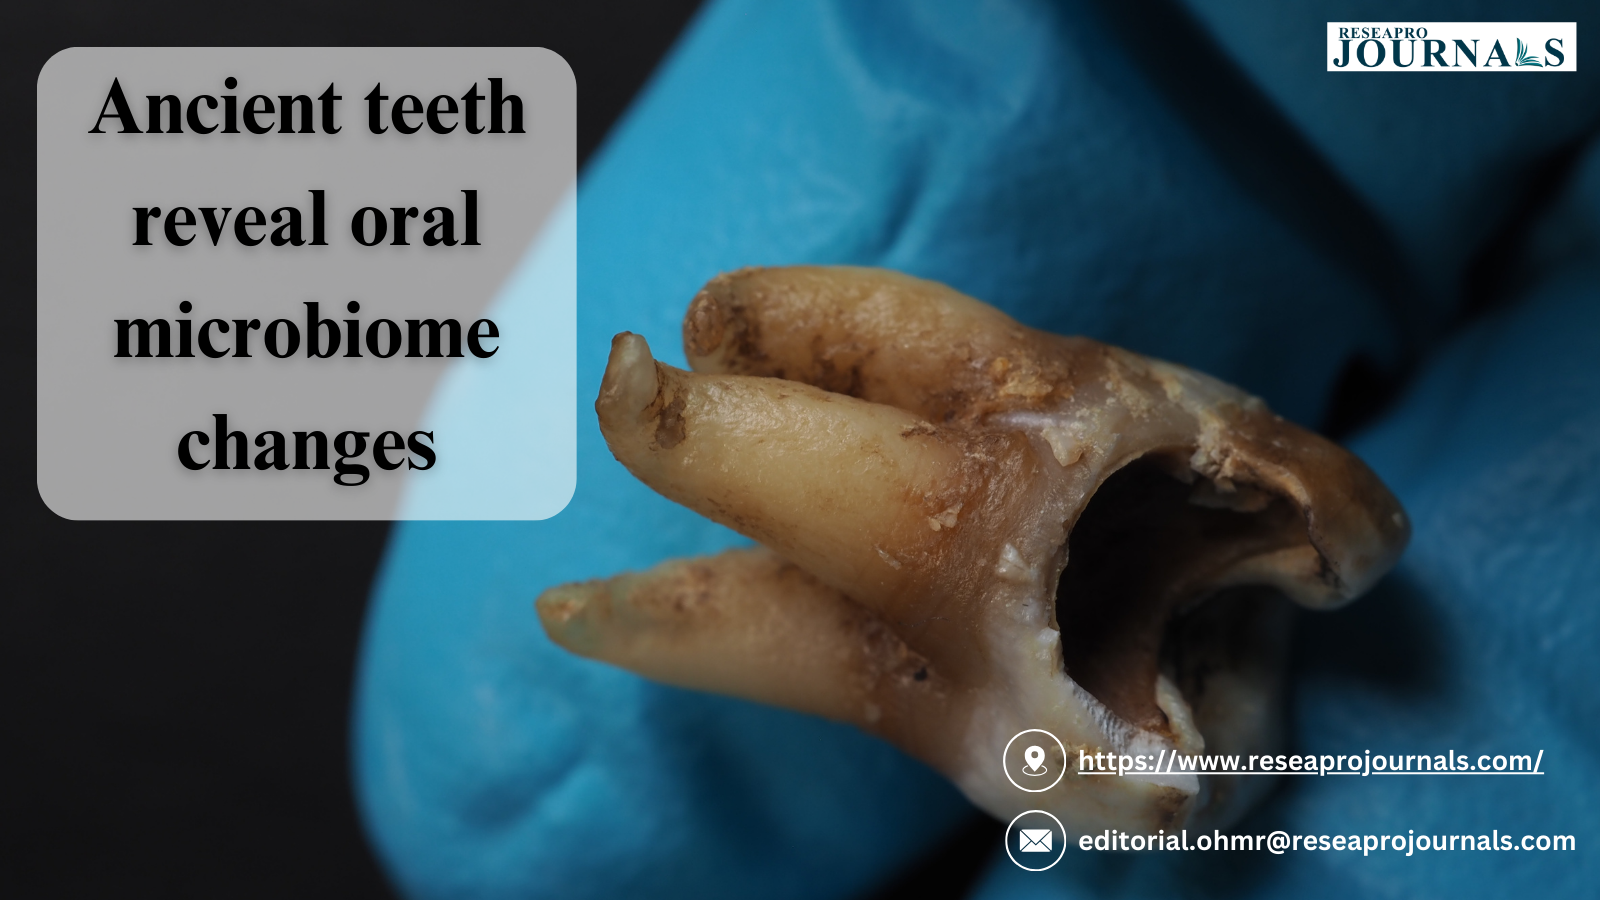 Ancient teeth reveal oral microbiome changes